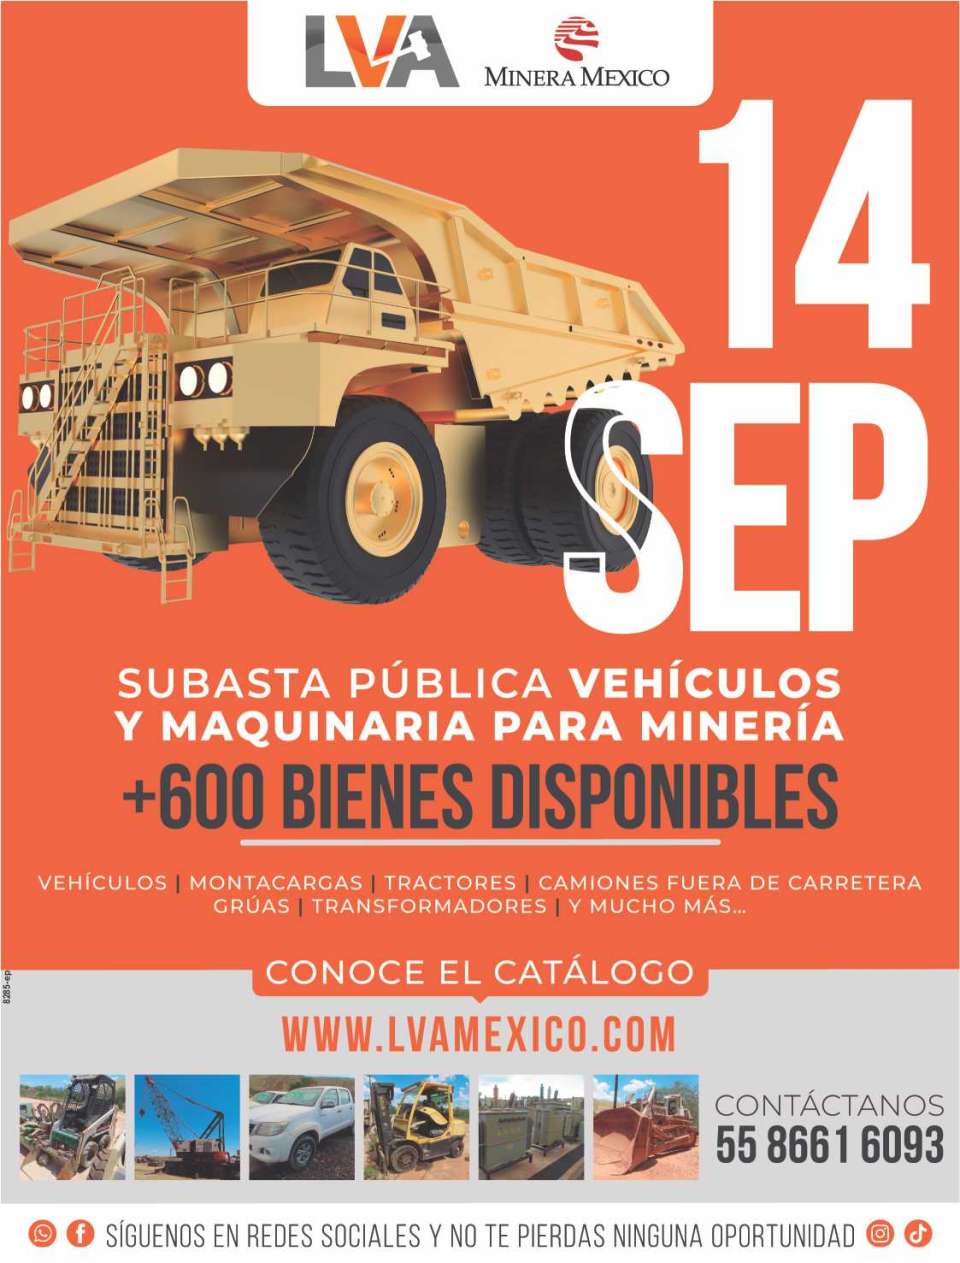 Public Auction-September 14. LVA Minera Mexico. Vehicles and Mining Machinery. Vehicles, Forklifts, Tractors, Off-road trucks, Cranes, Transformers and much more...